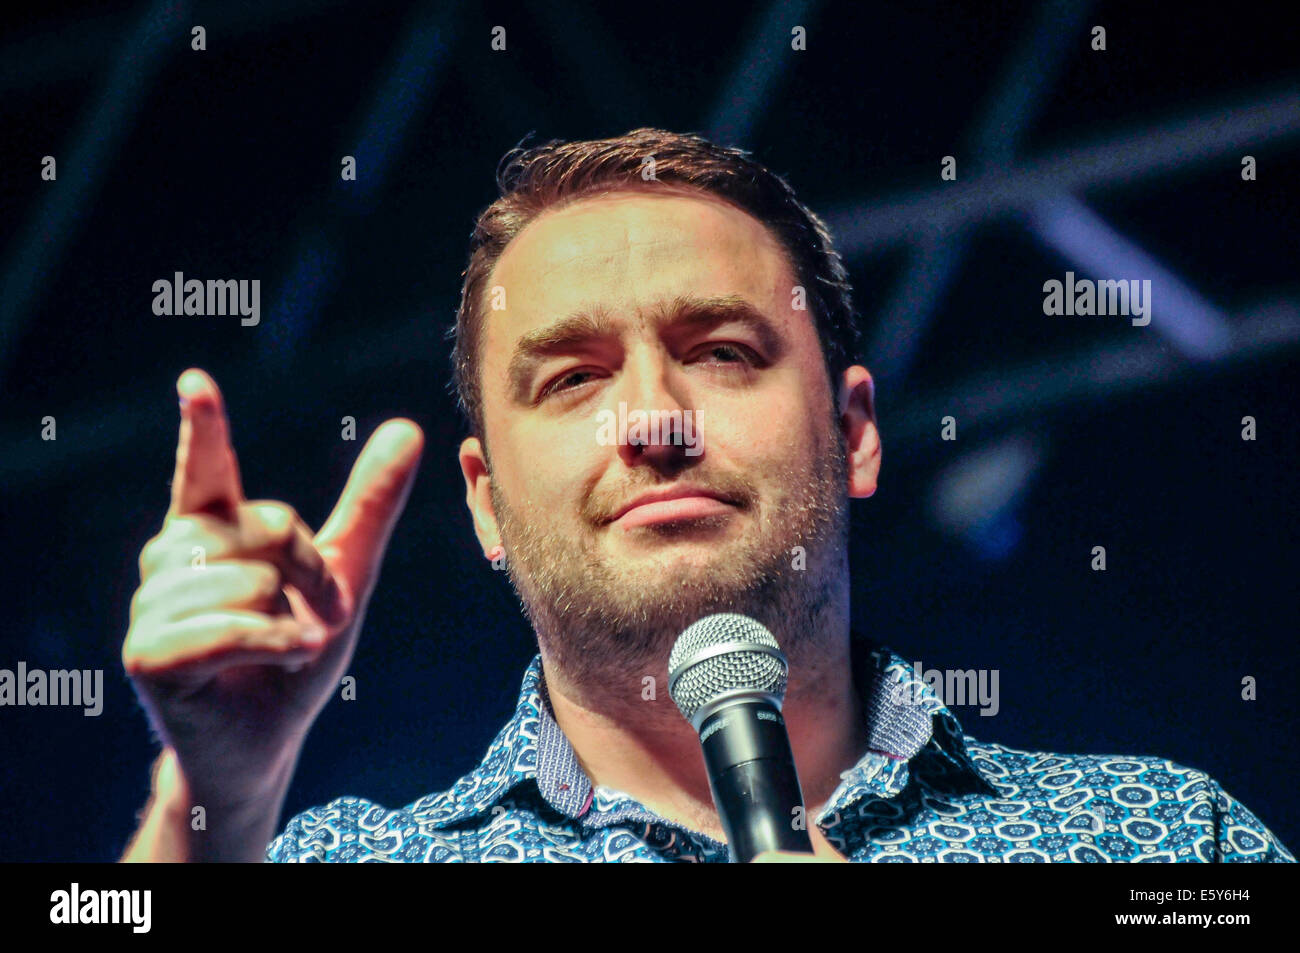 Belfast, Northern Ireland. 7 Aug 2014 - Mancunian Jason Manford performs at Stand-up Comedy night, Feile an Phobail Stock Photo